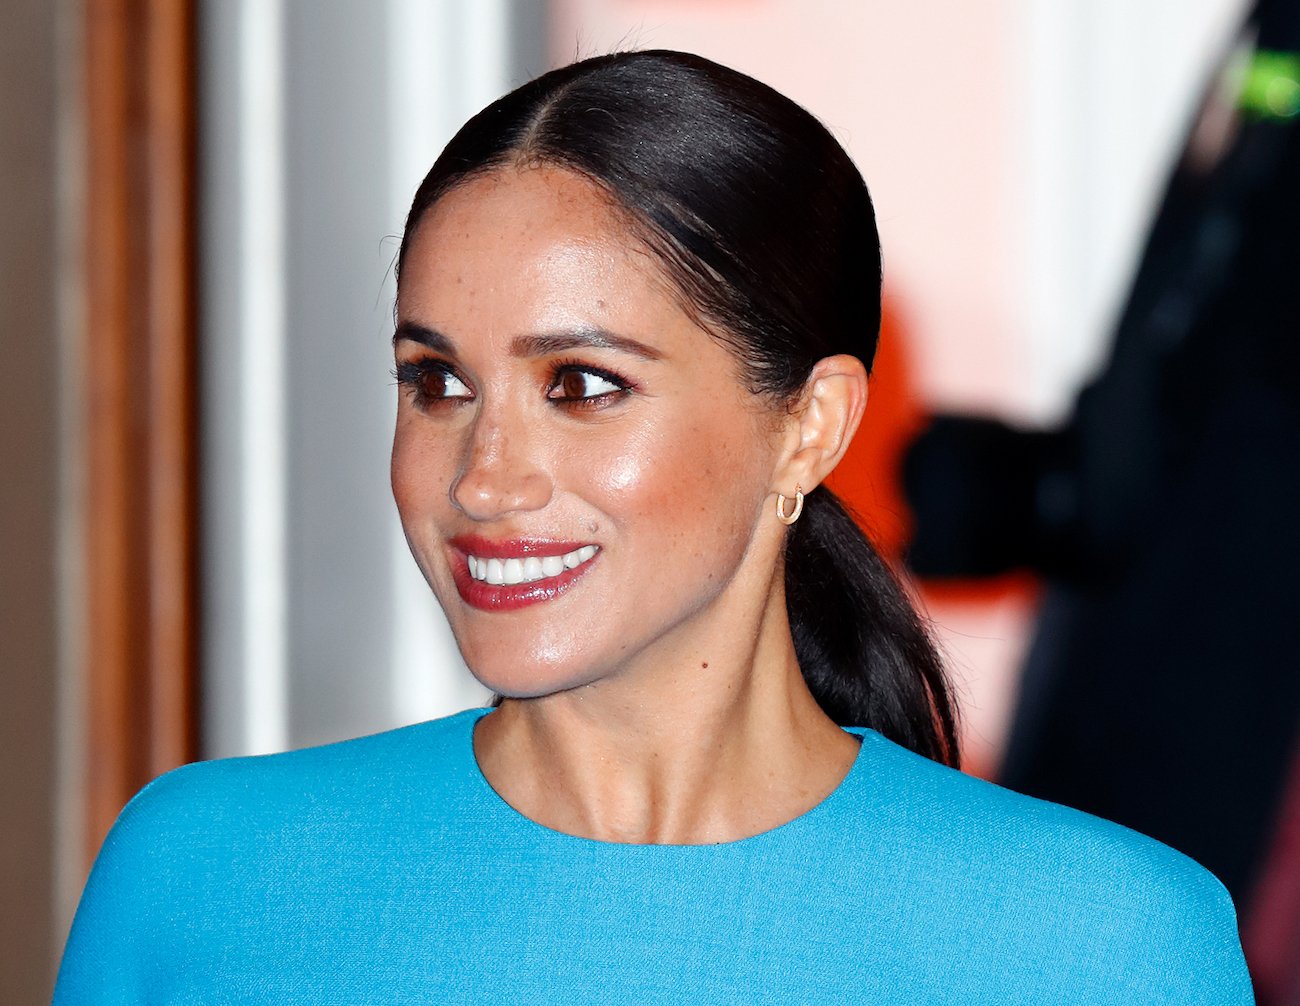 Meghan Markle’s ‘Attitude’ Problem Was Caught on Camera During 1 Royal Event, According to Body Language Expert